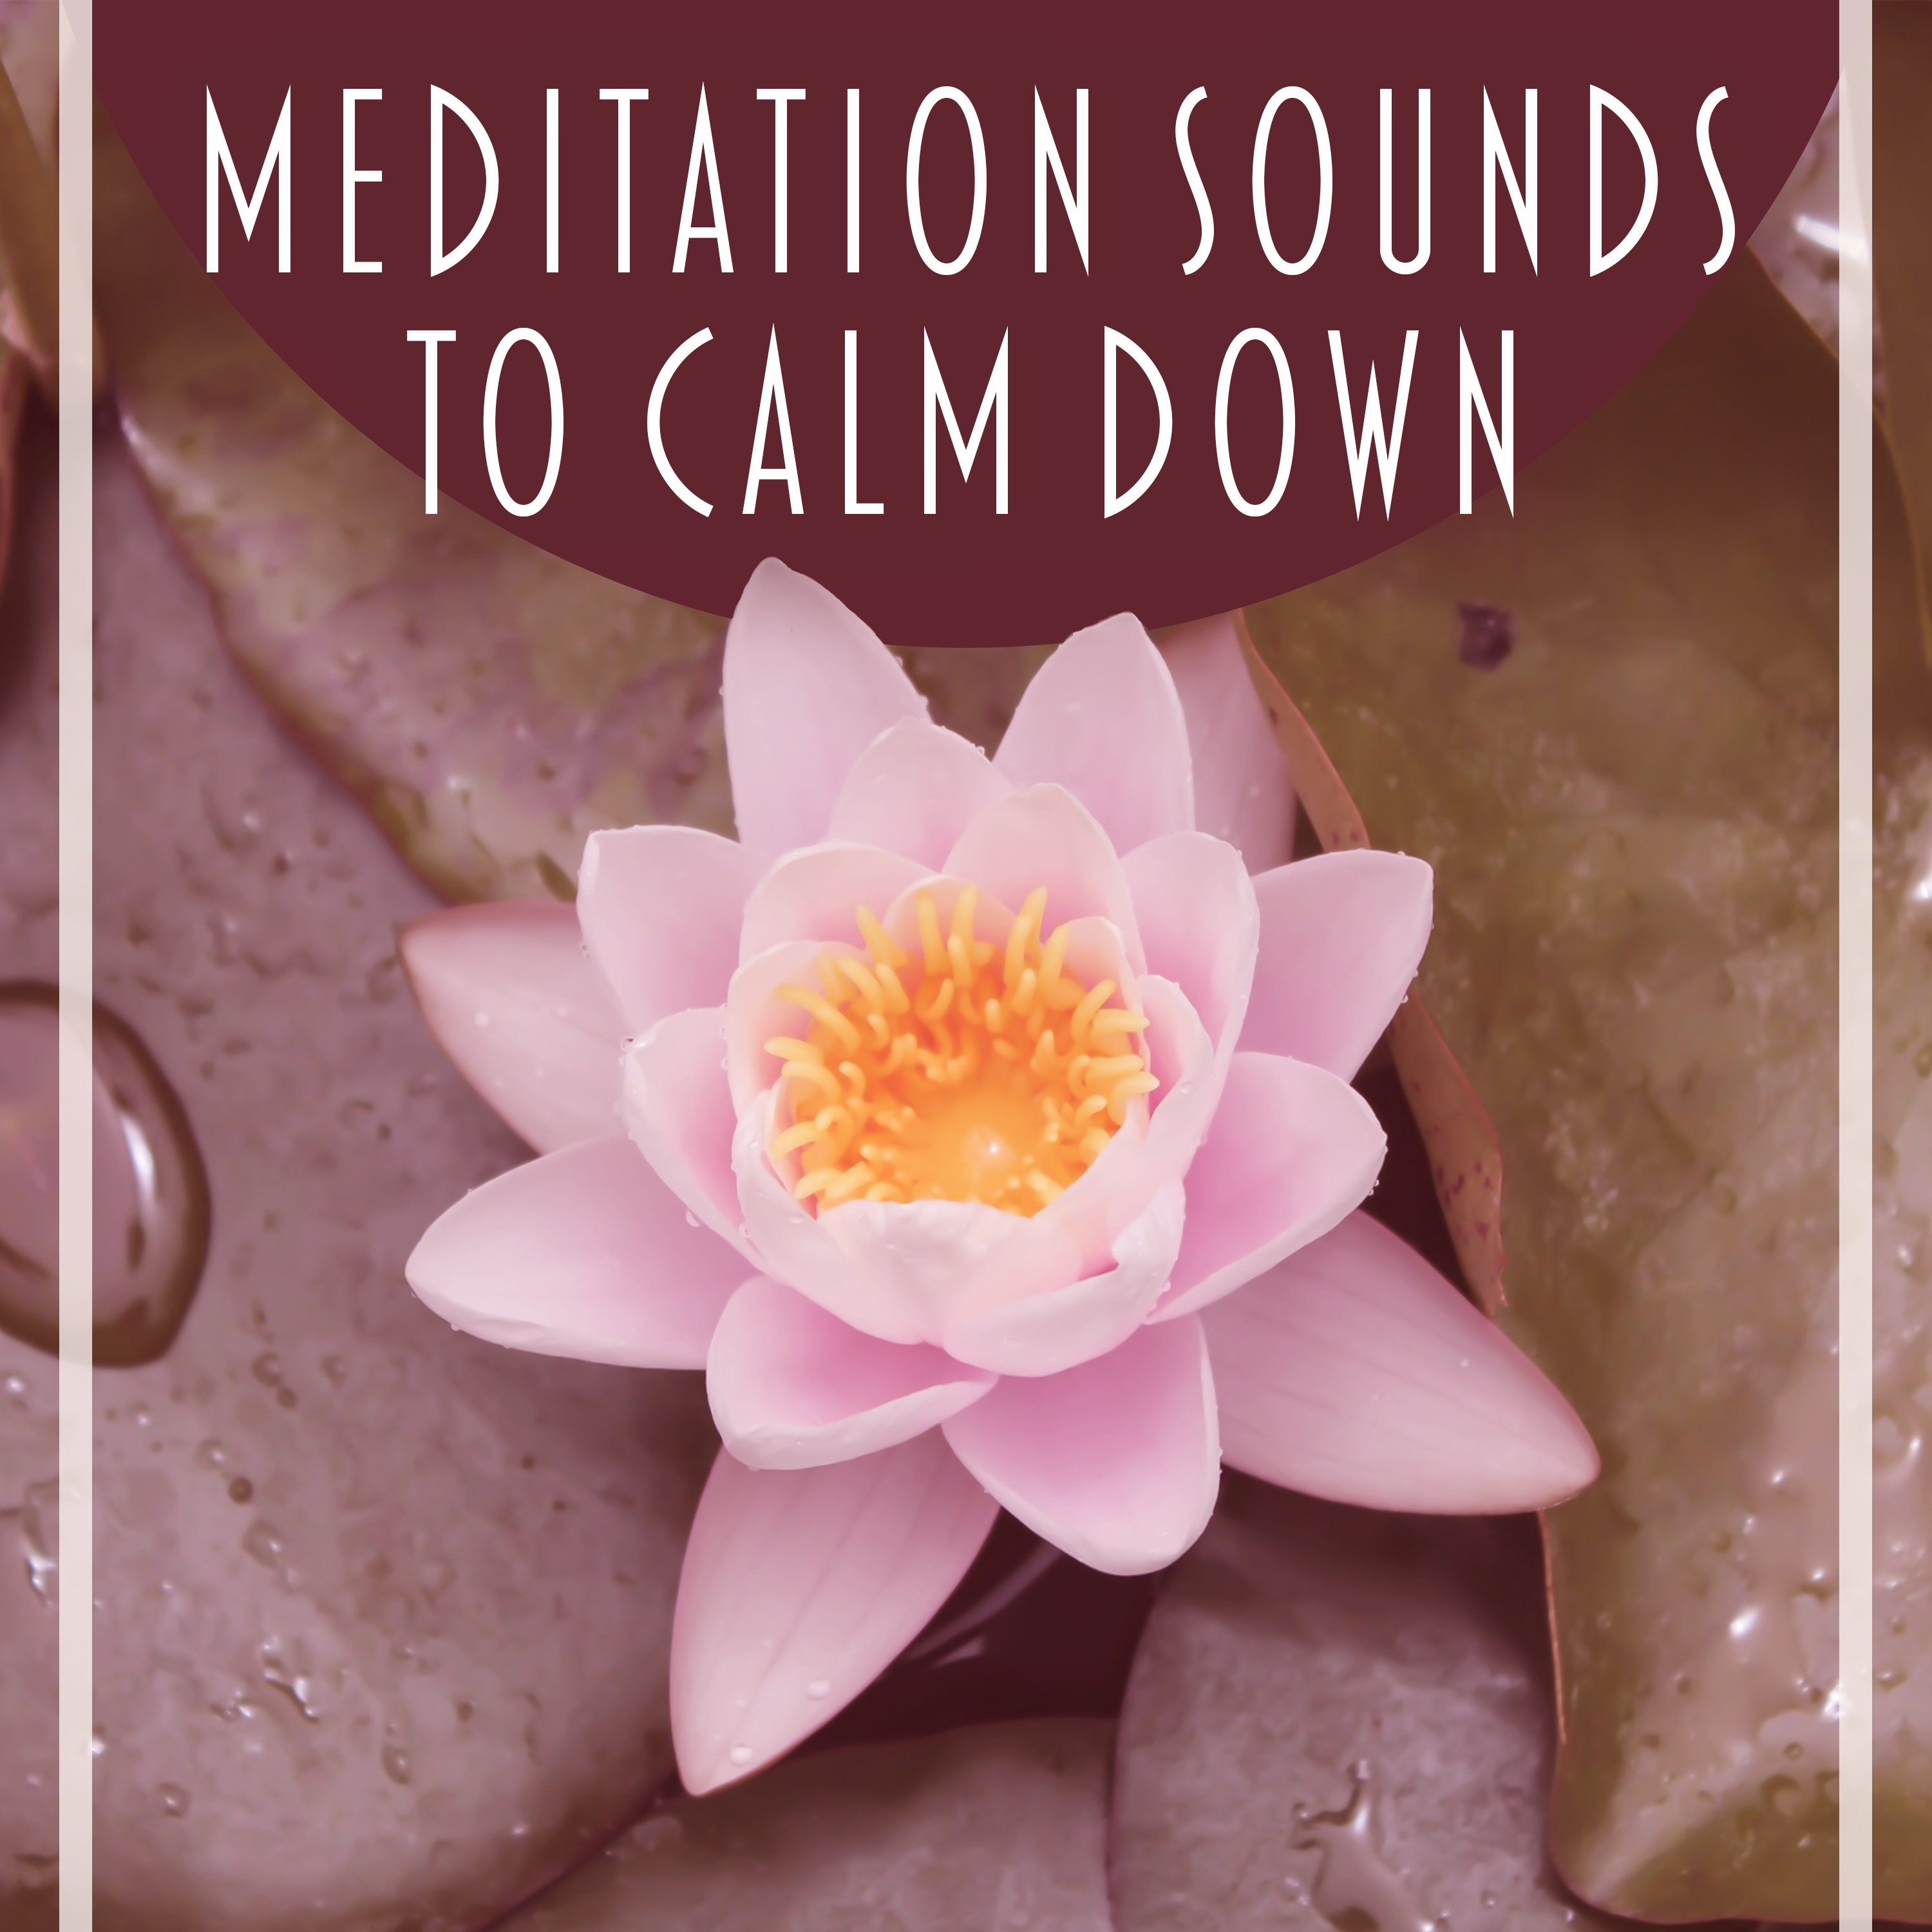 Meditation Sounds to Calm Down – New Age Meditation, Sounds for Inner Peace, Spirit Harmony, Stress Relief